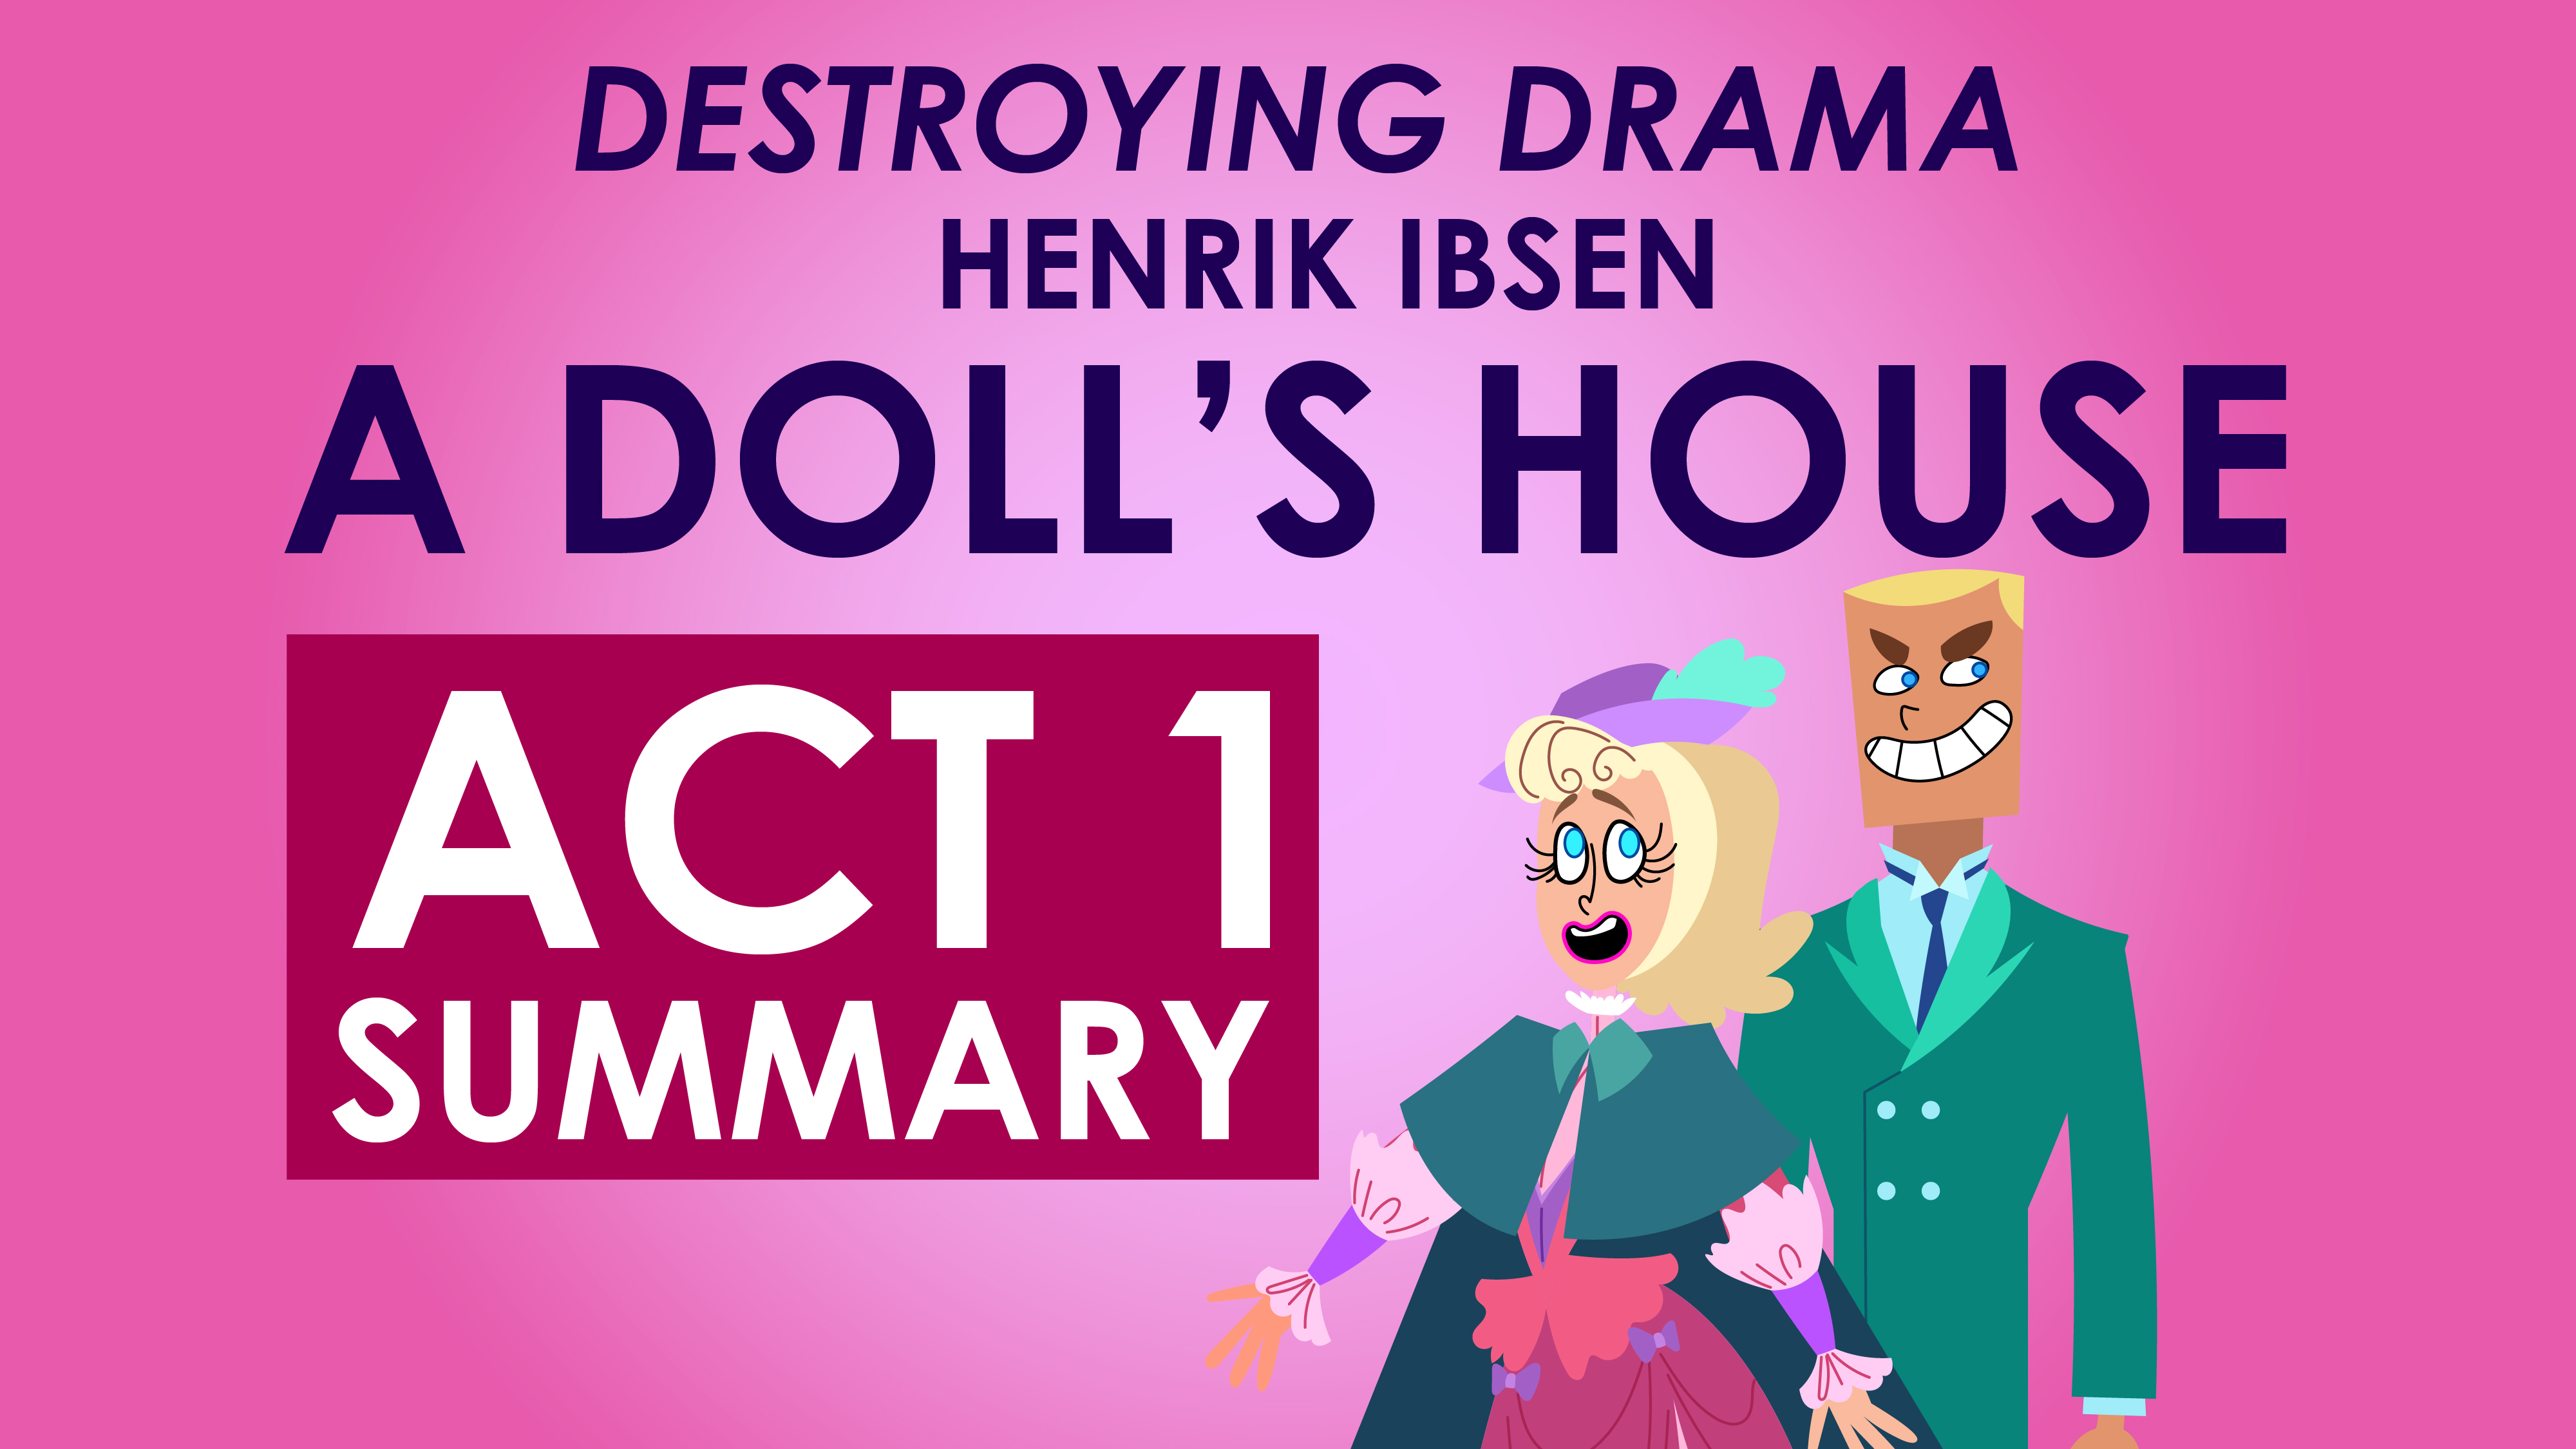 A Doll's House - Henrik Ibsen - Act 1 Summary - Destroying Drama Series